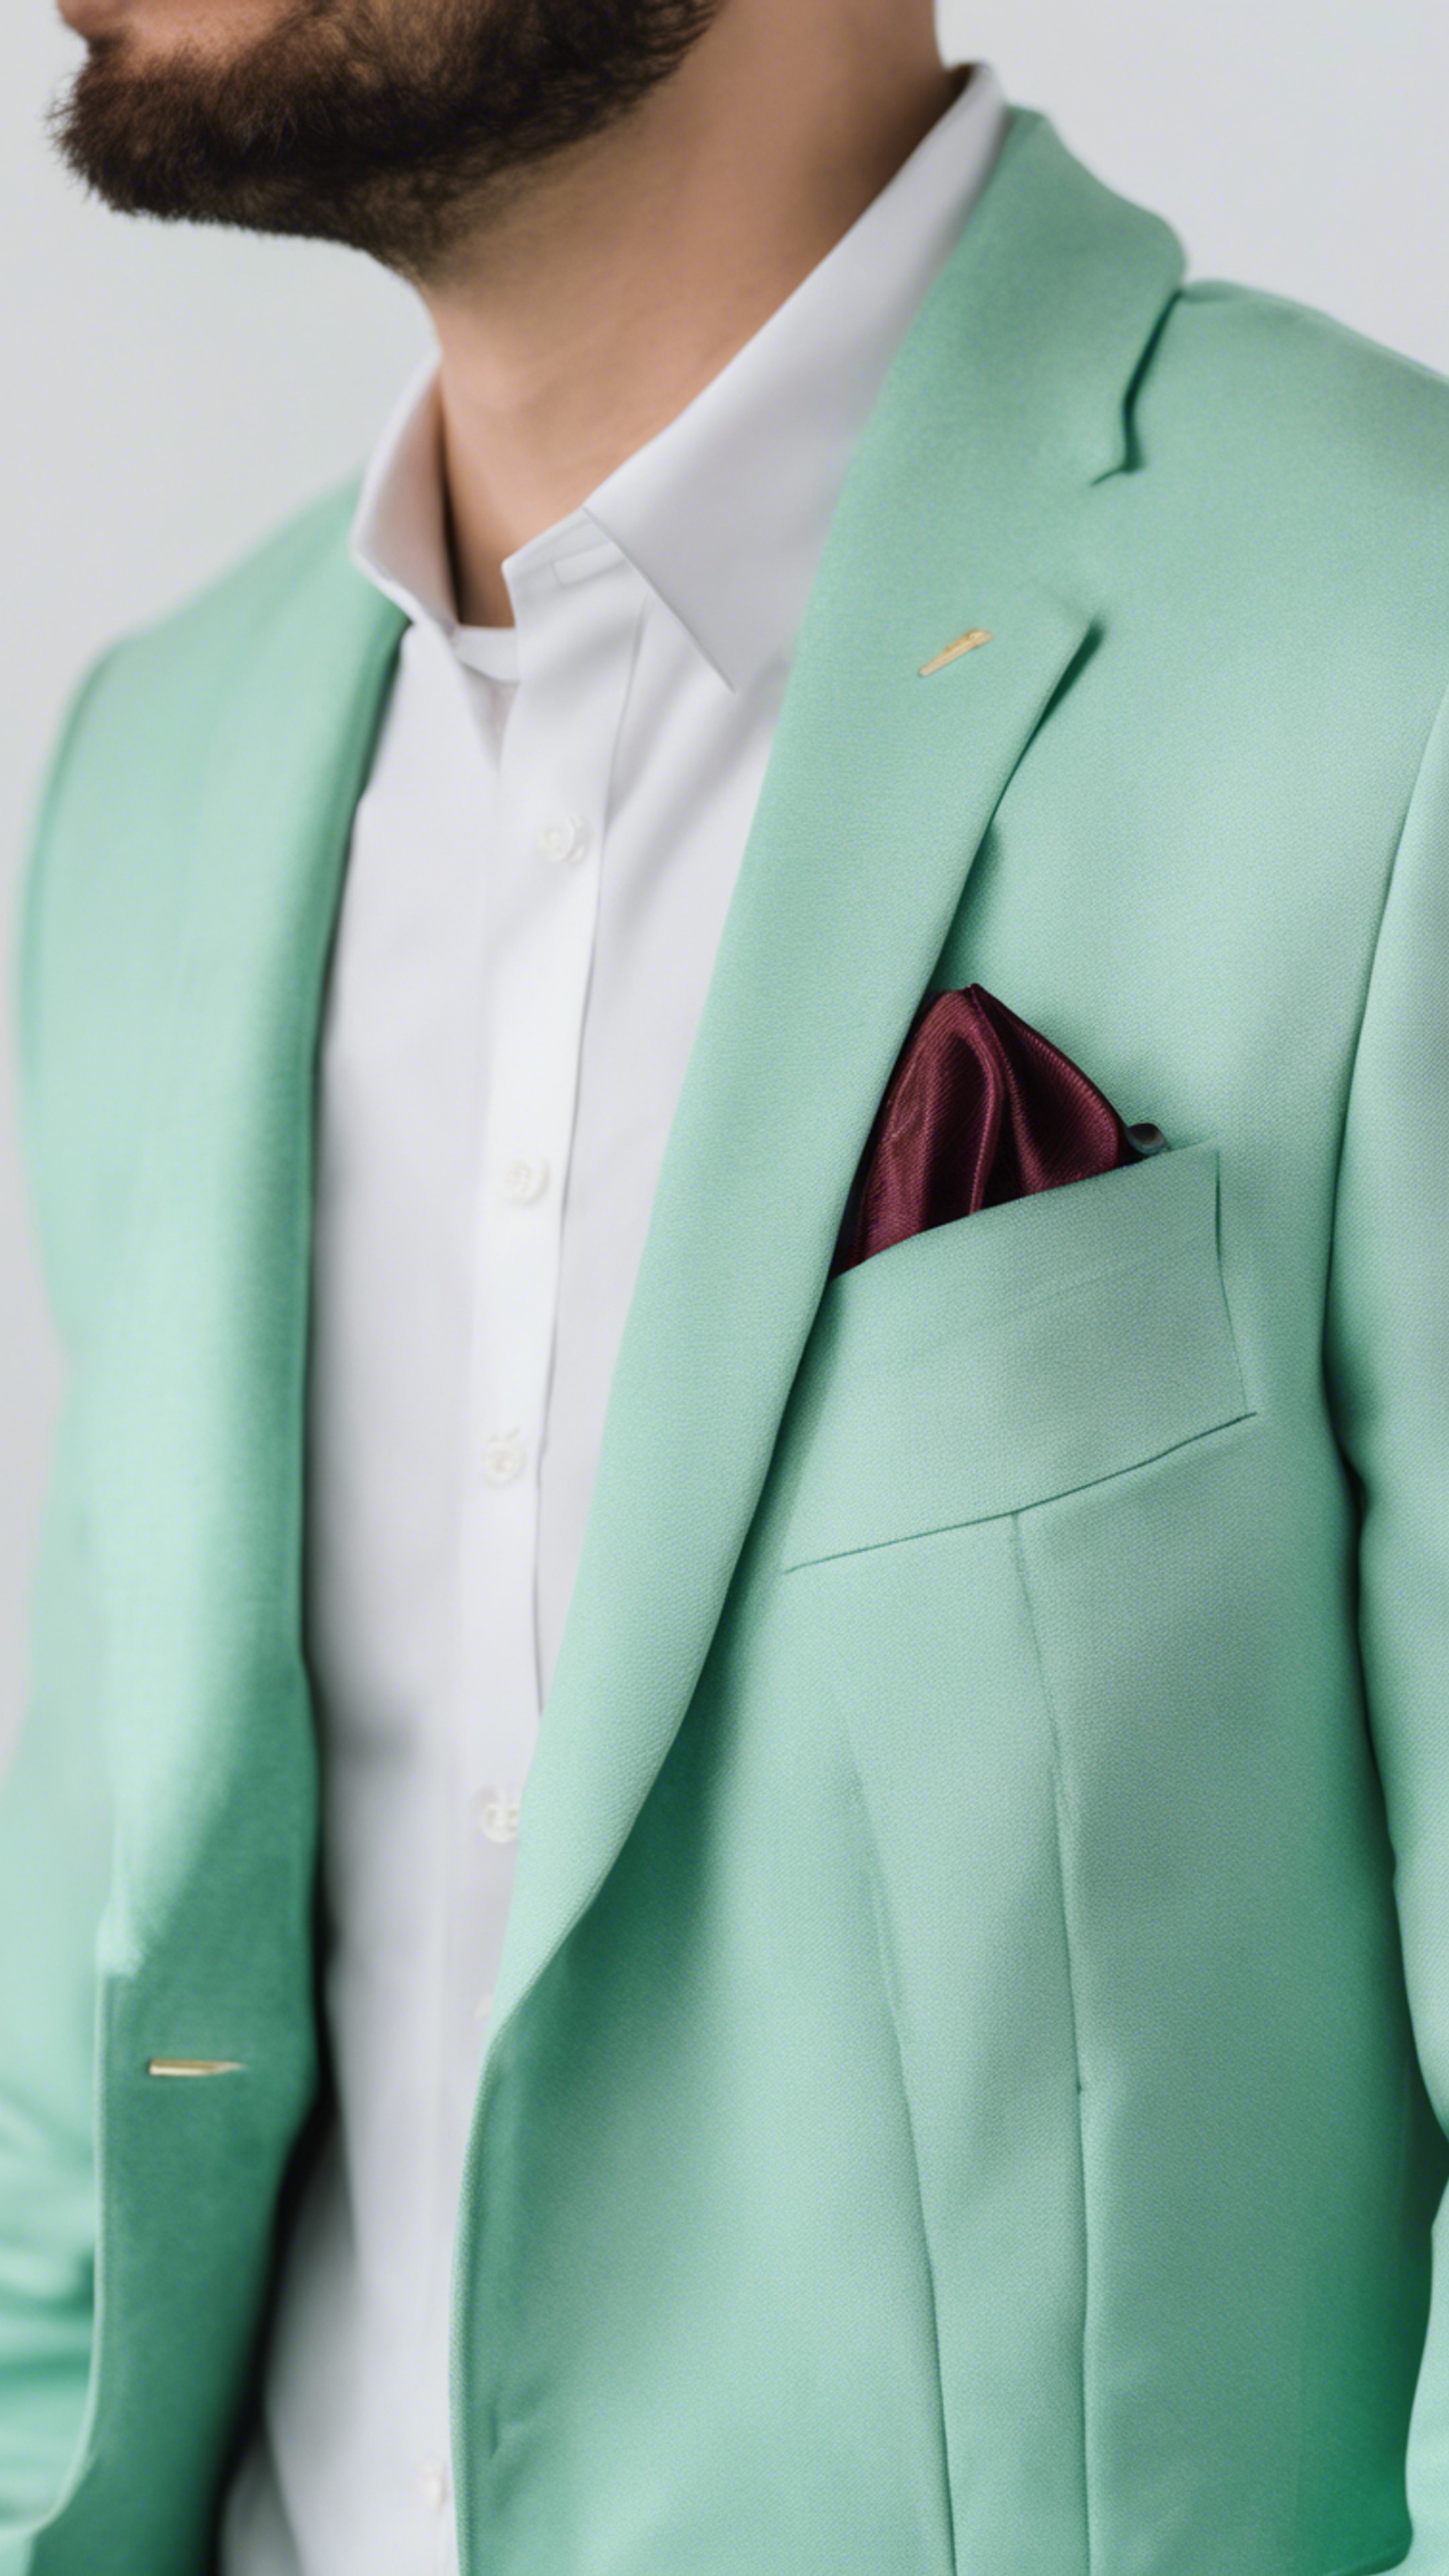 A stunning mint green preppy style blazer hanging against a white background. Wallpaper[3731070bd3ce4d88a3e1]